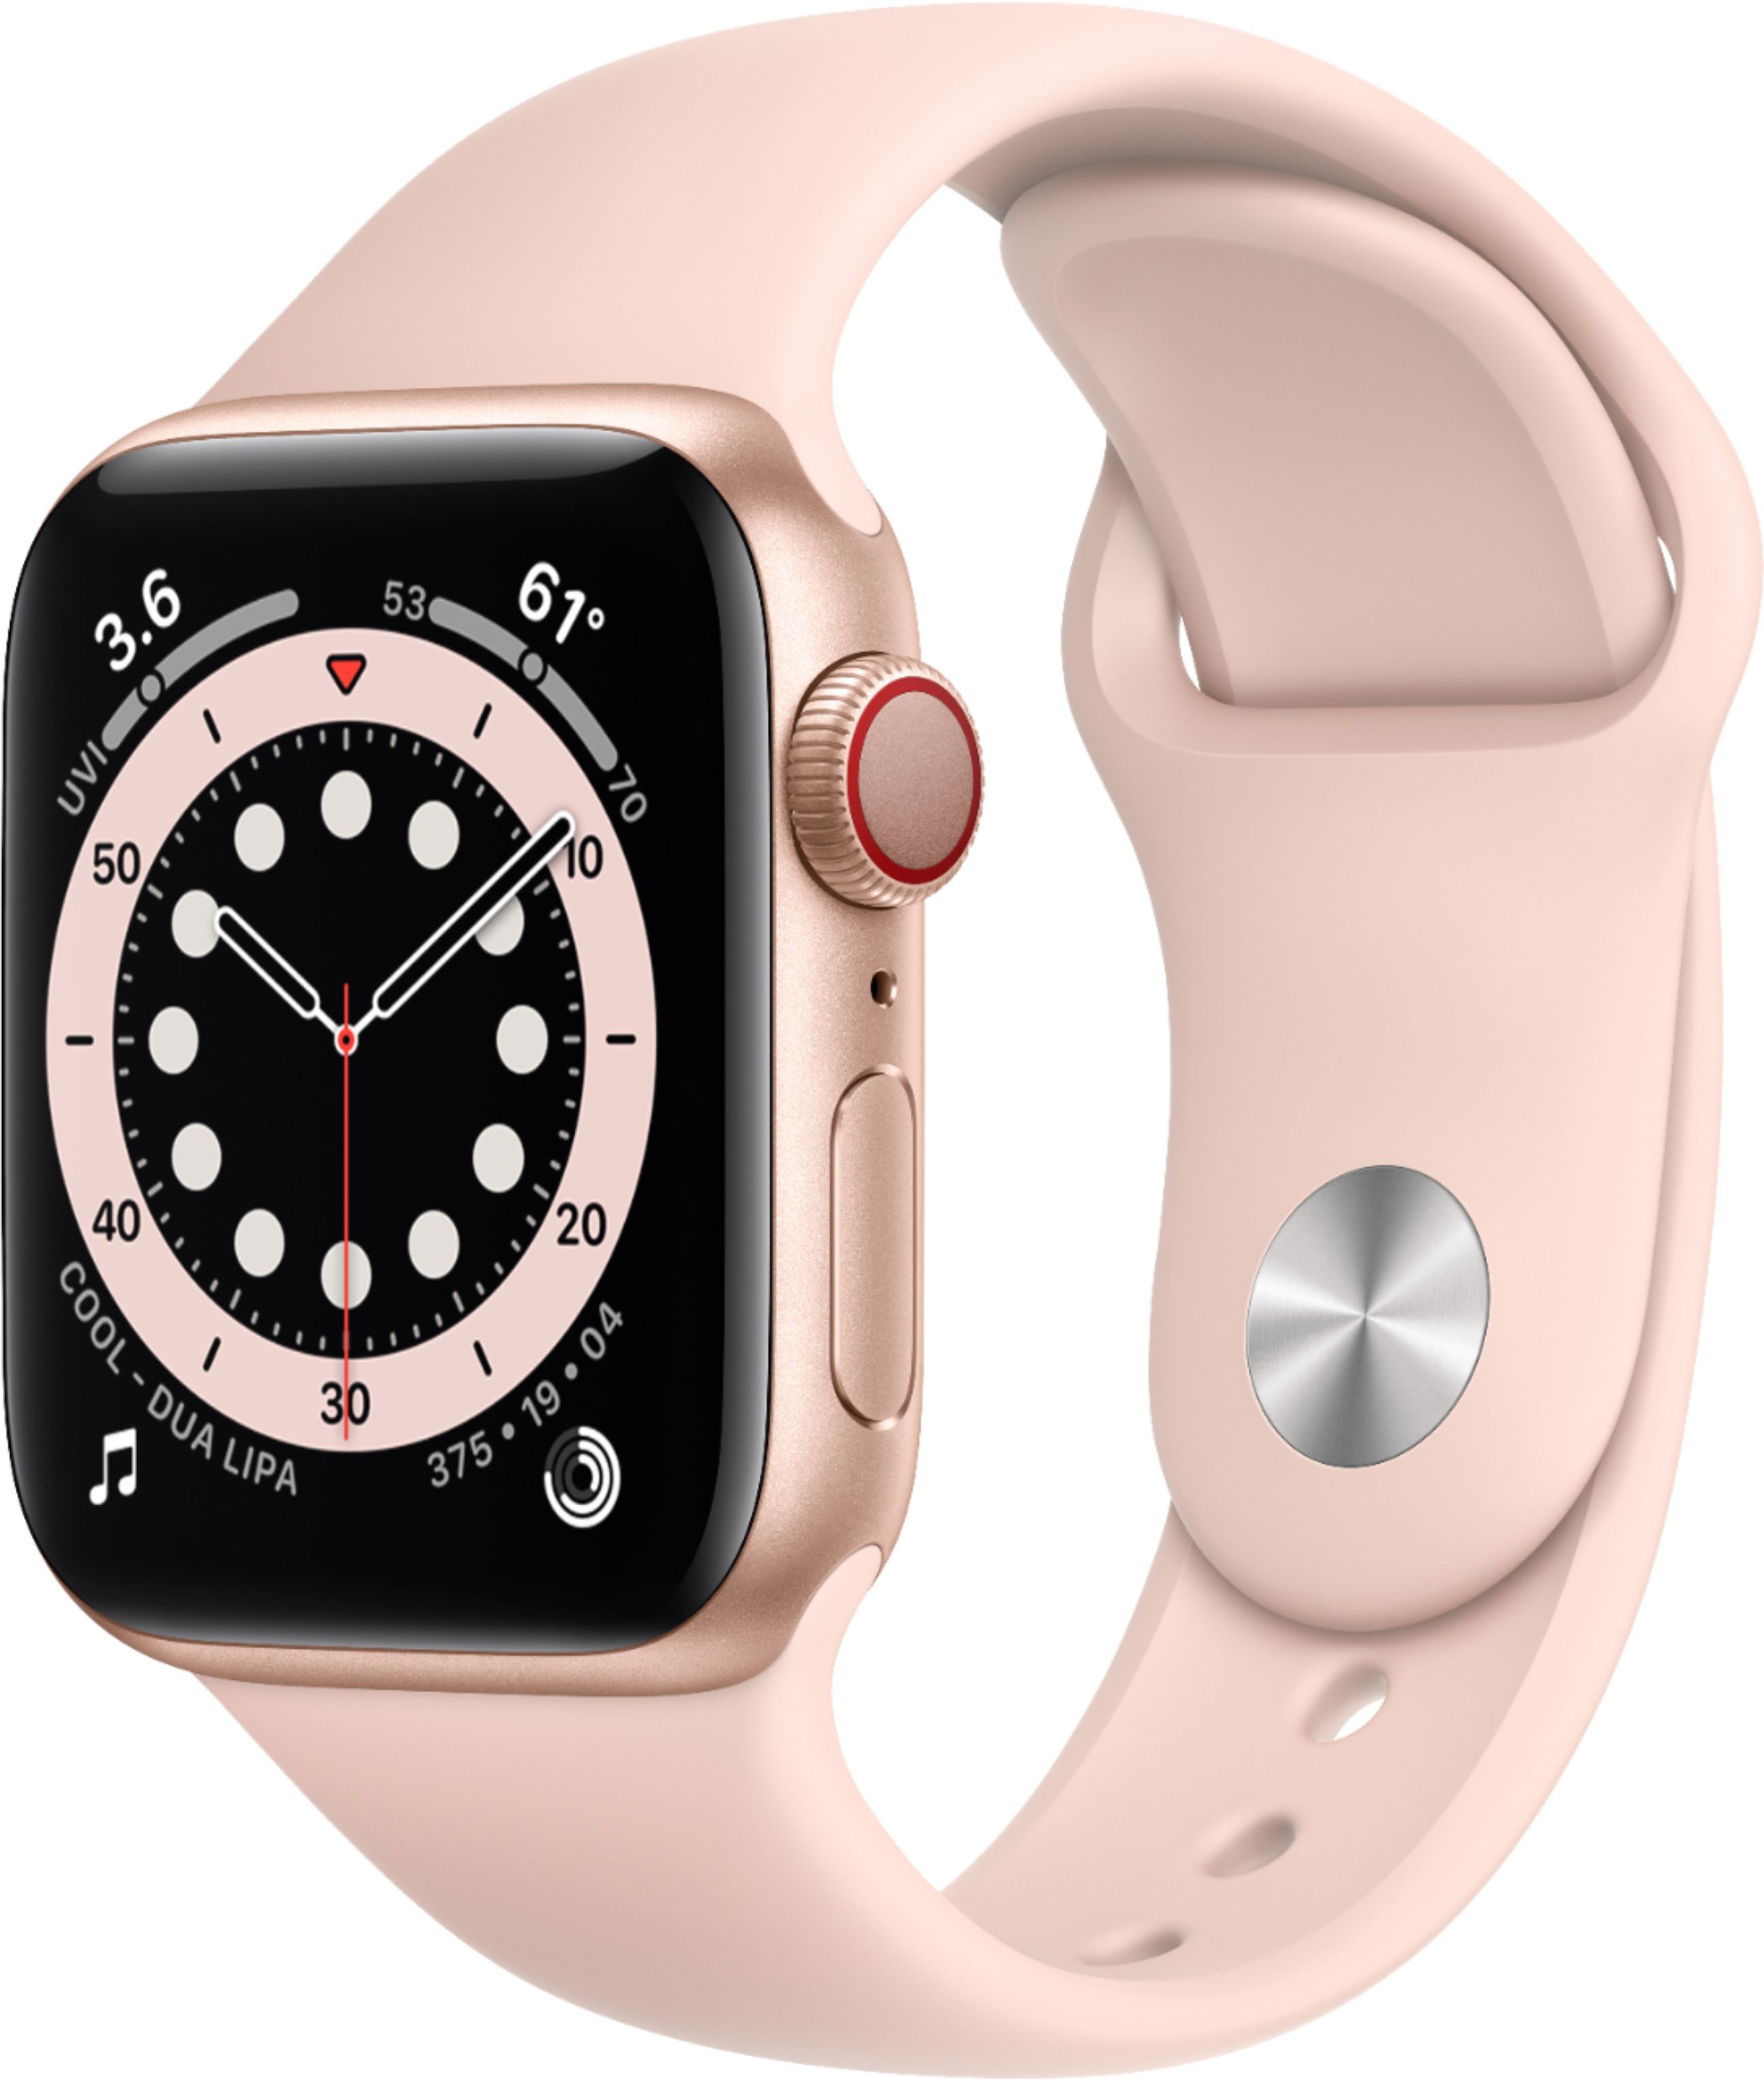 How To Add Apple Watch To Verizon Plan? Keep Your Watch Synced  